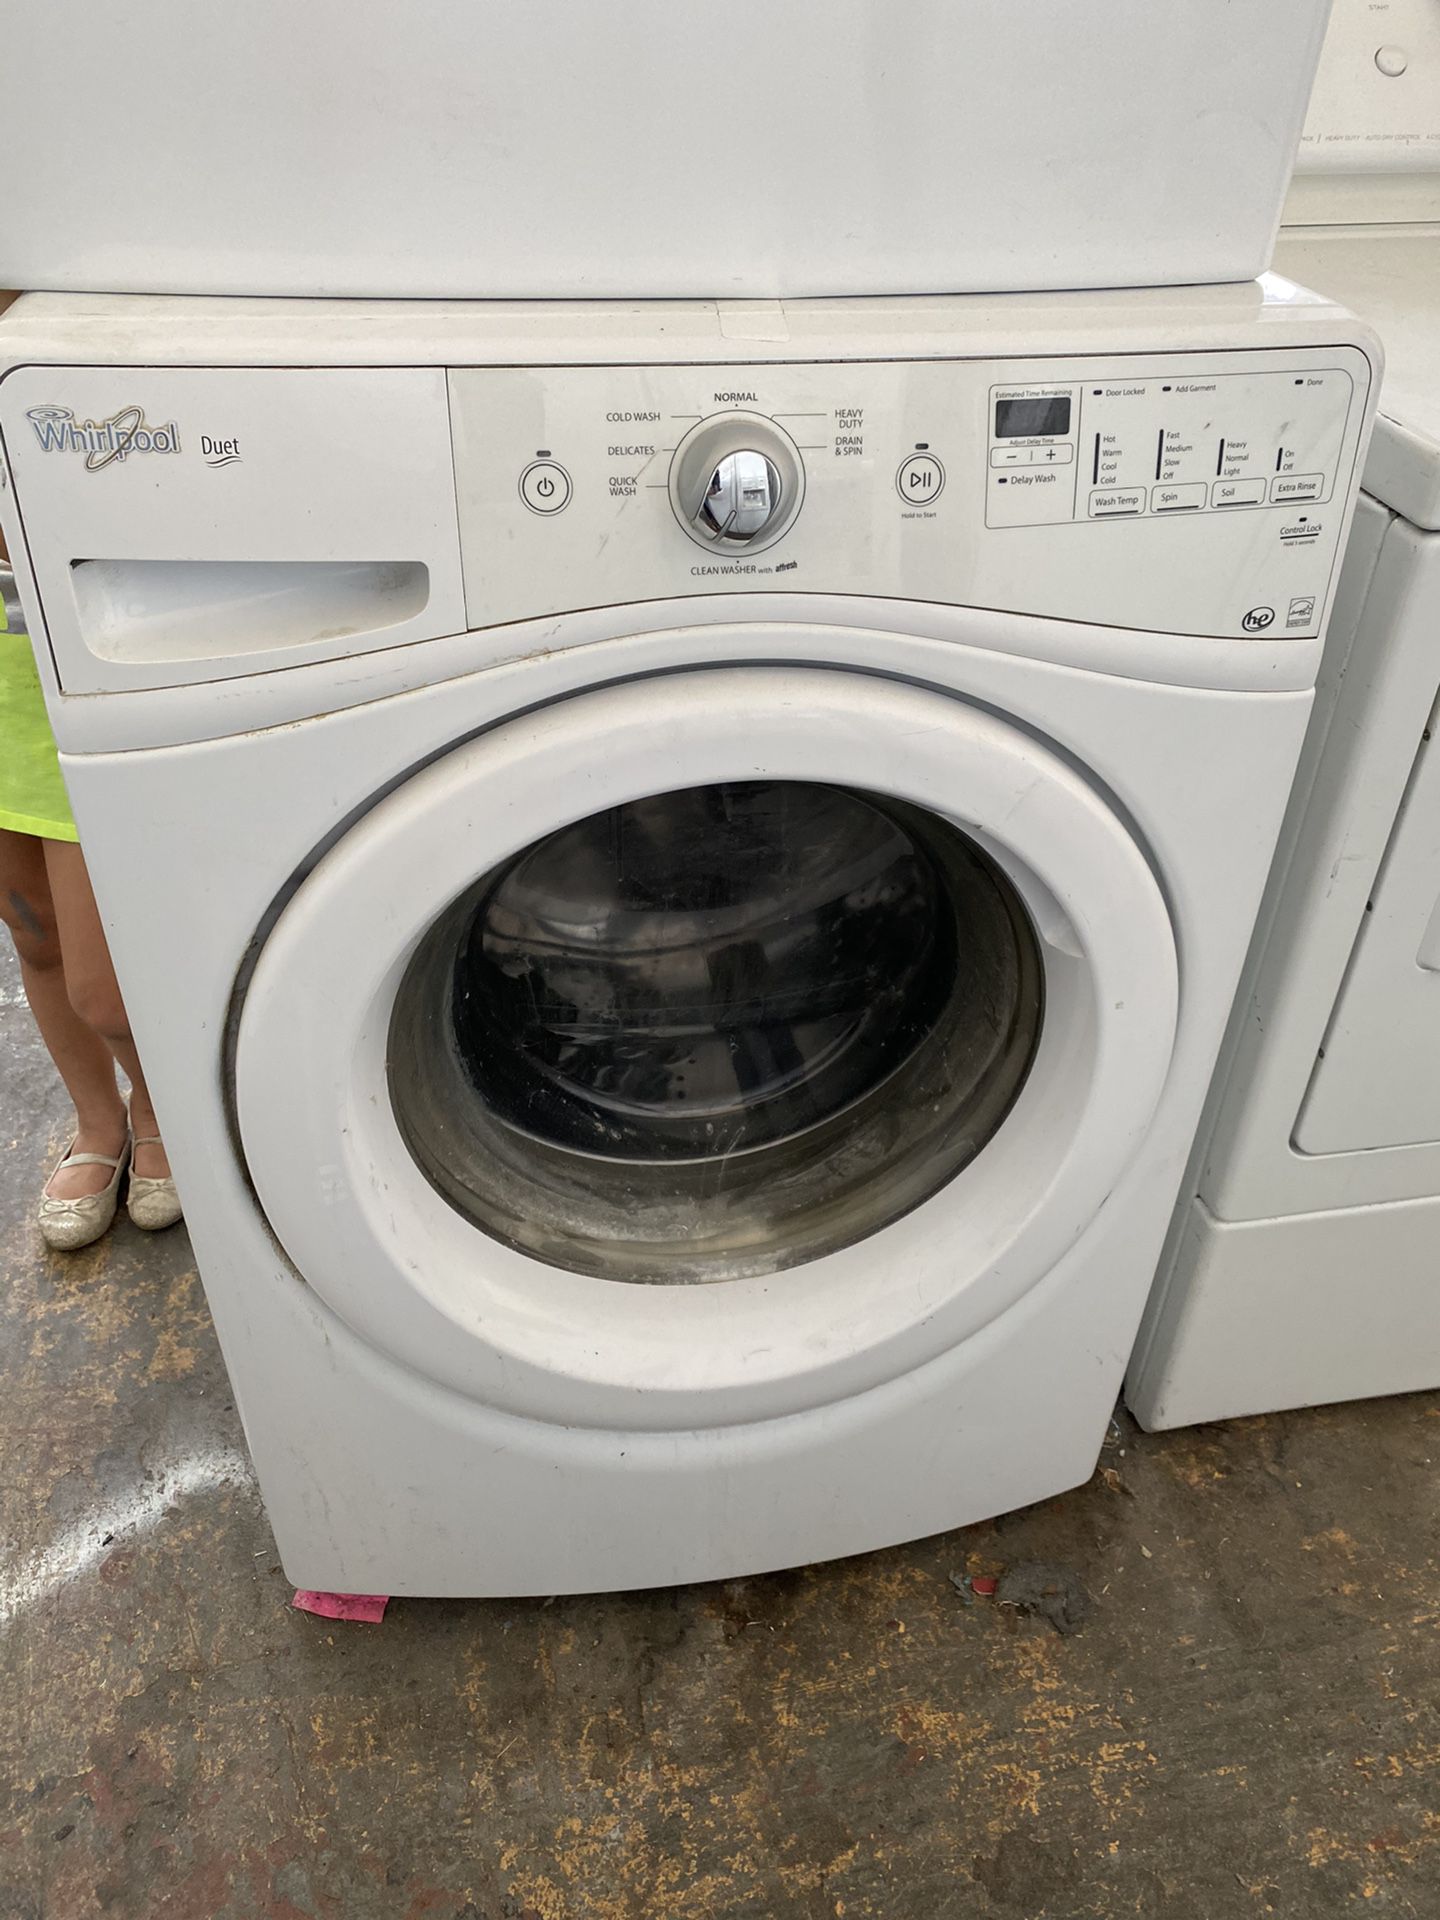 Whirlpool Duet Front Load Washing Machine "Stackable"